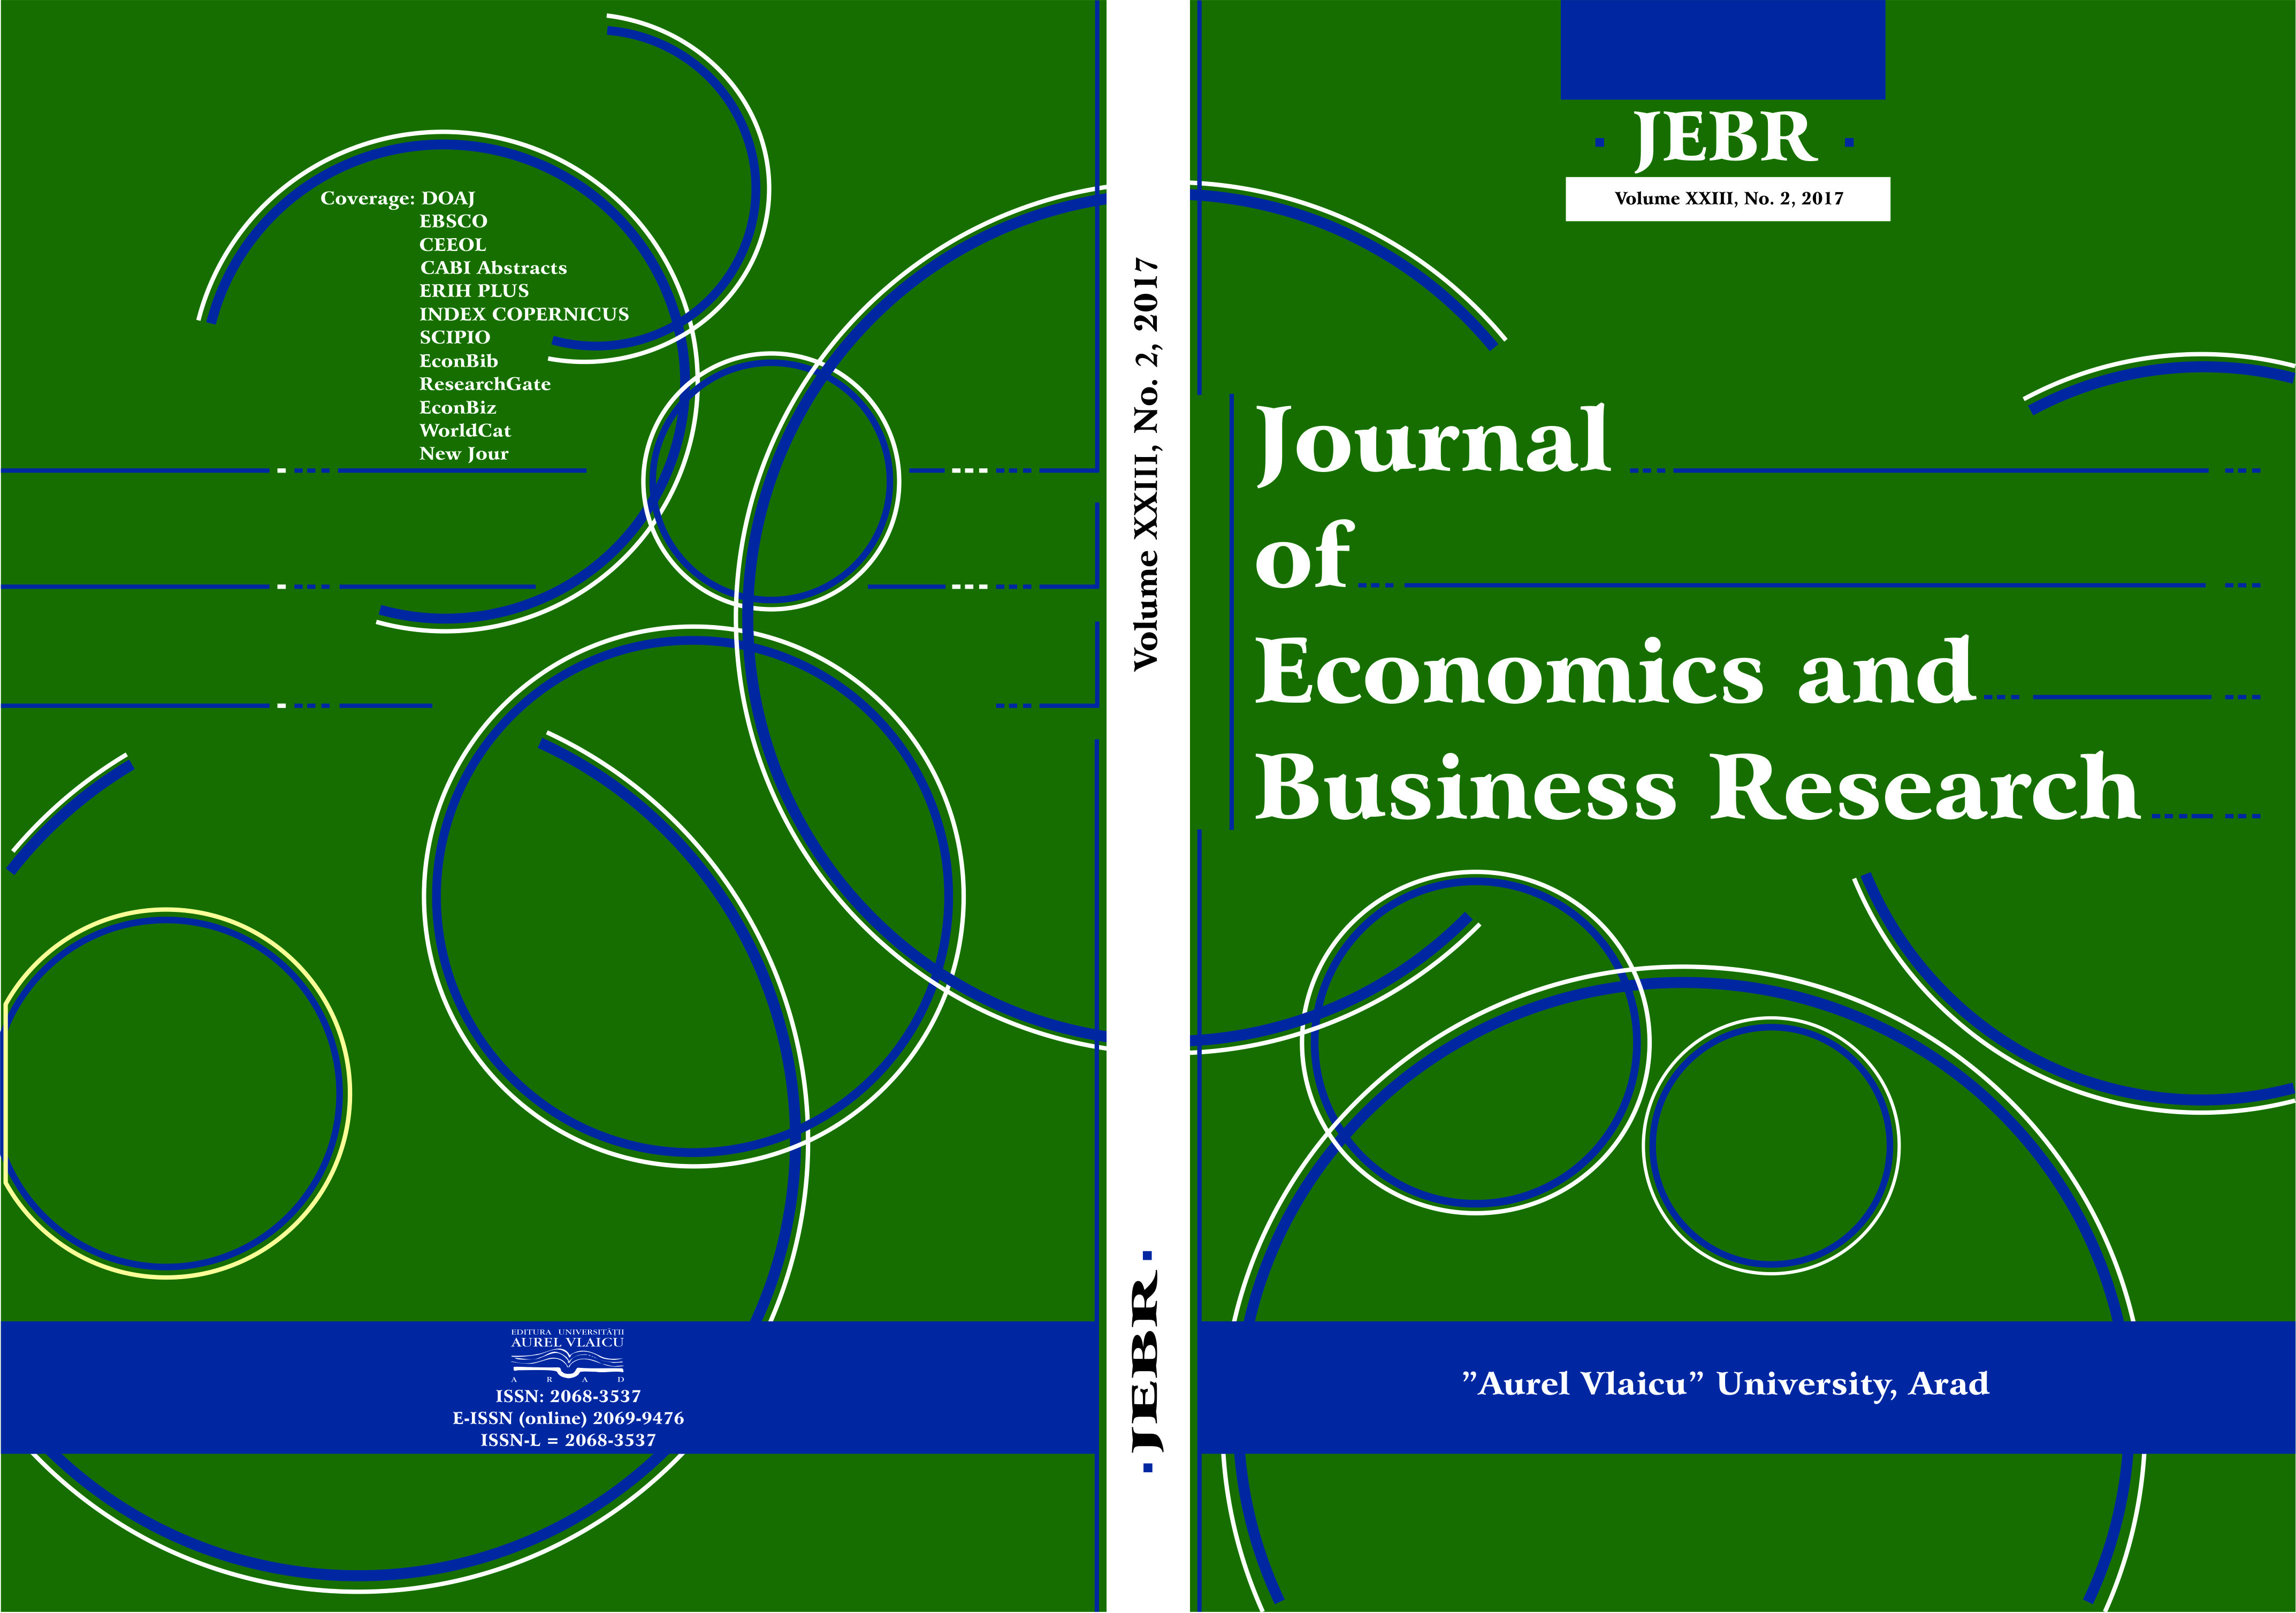 Impacts of Macroeconomic Indicators on Economic Growth in Southeast Asia: A Panel Data Analysis